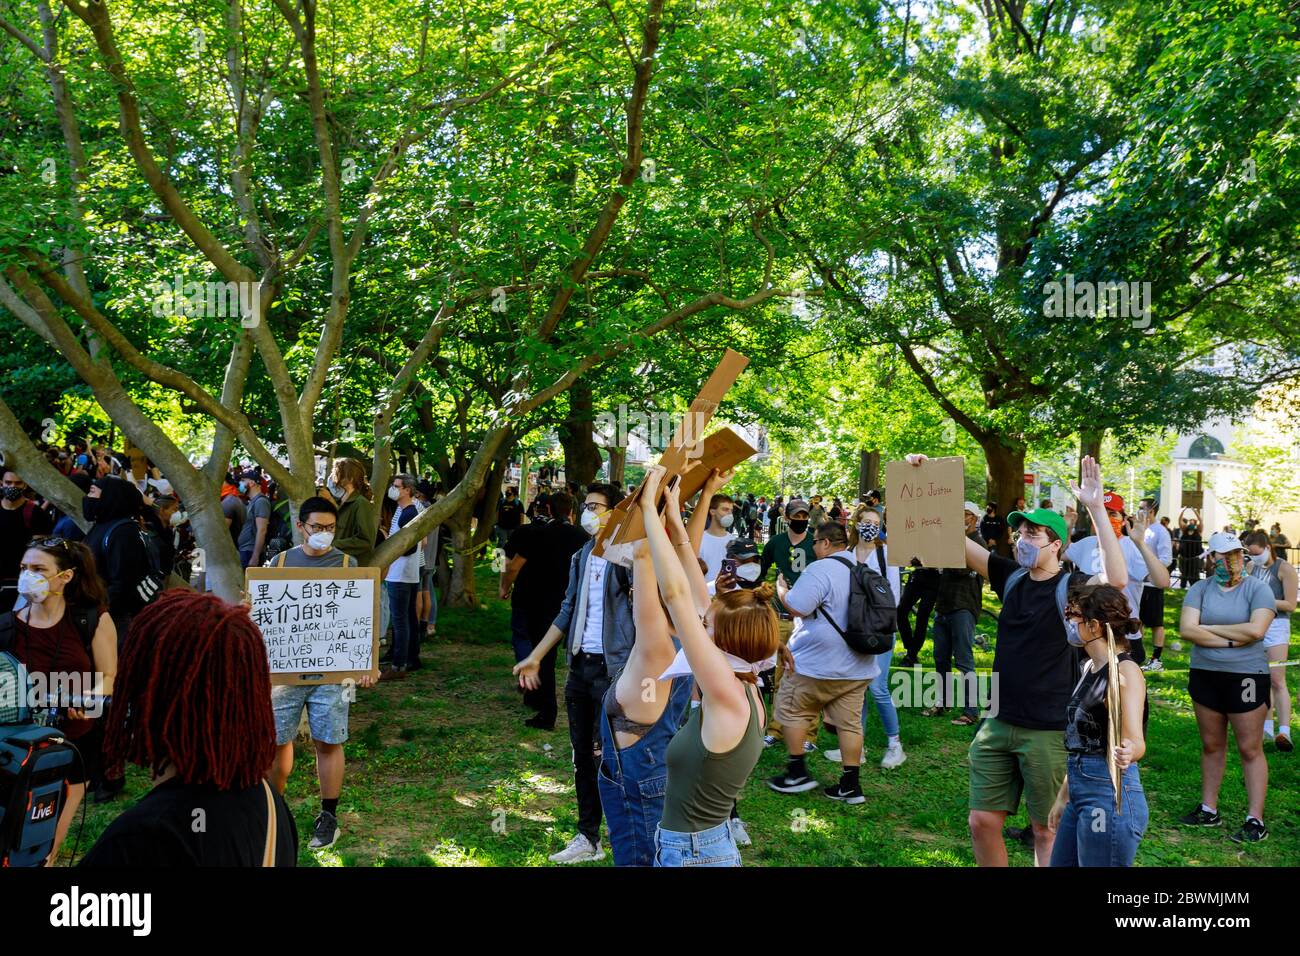 WASHINGTON D.C., USA - MAY 31, 2020: Protesters march in WASHINGTON D.C. during a rally responding to the death of Minneapolis man George Floyd at the hands of police on White House president Donald Trump Stock Photo